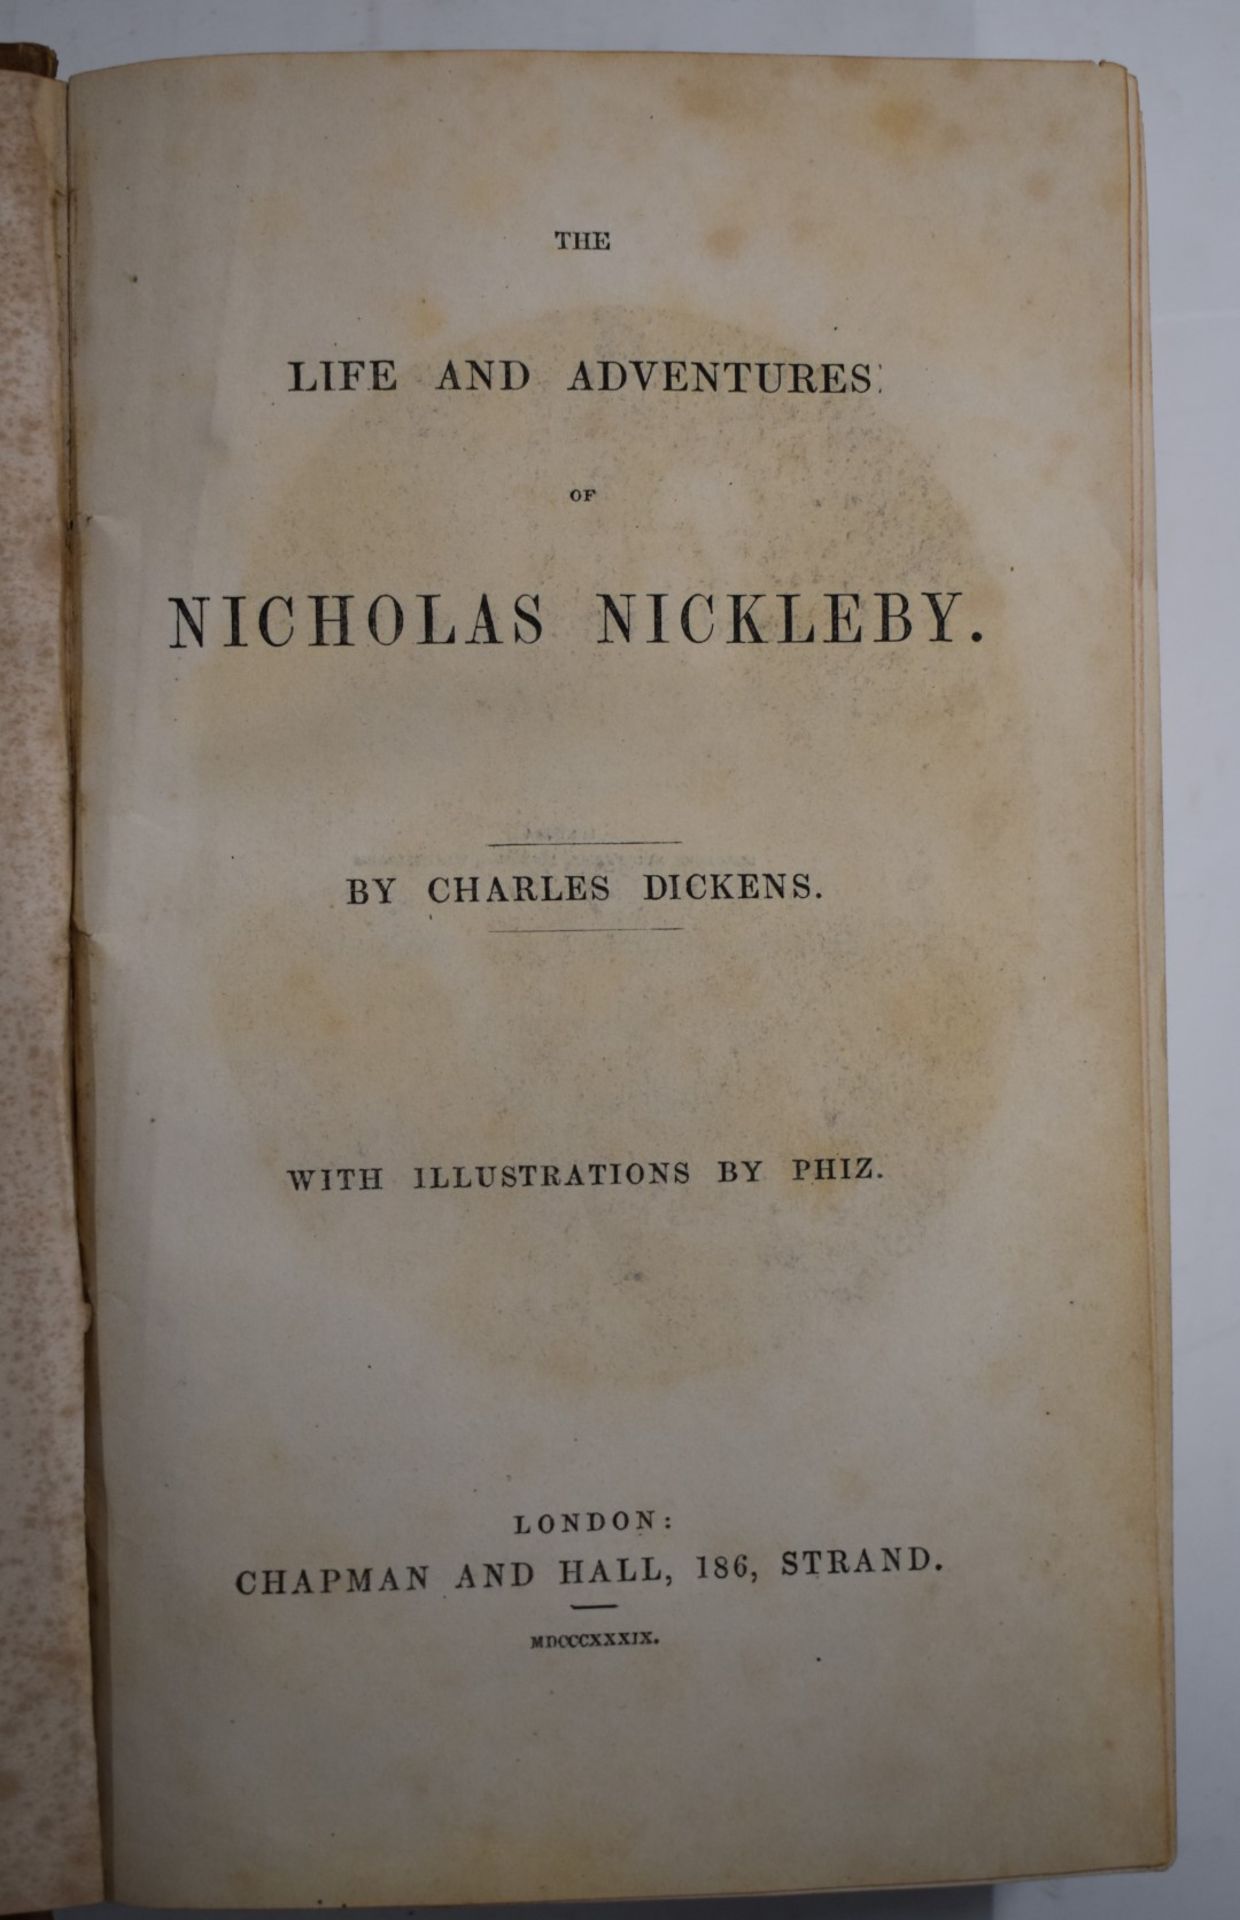 Charles Dickens The Life & Adventures of Nicholas Nickleby with Illustrations by Phiz published - Image 2 of 2